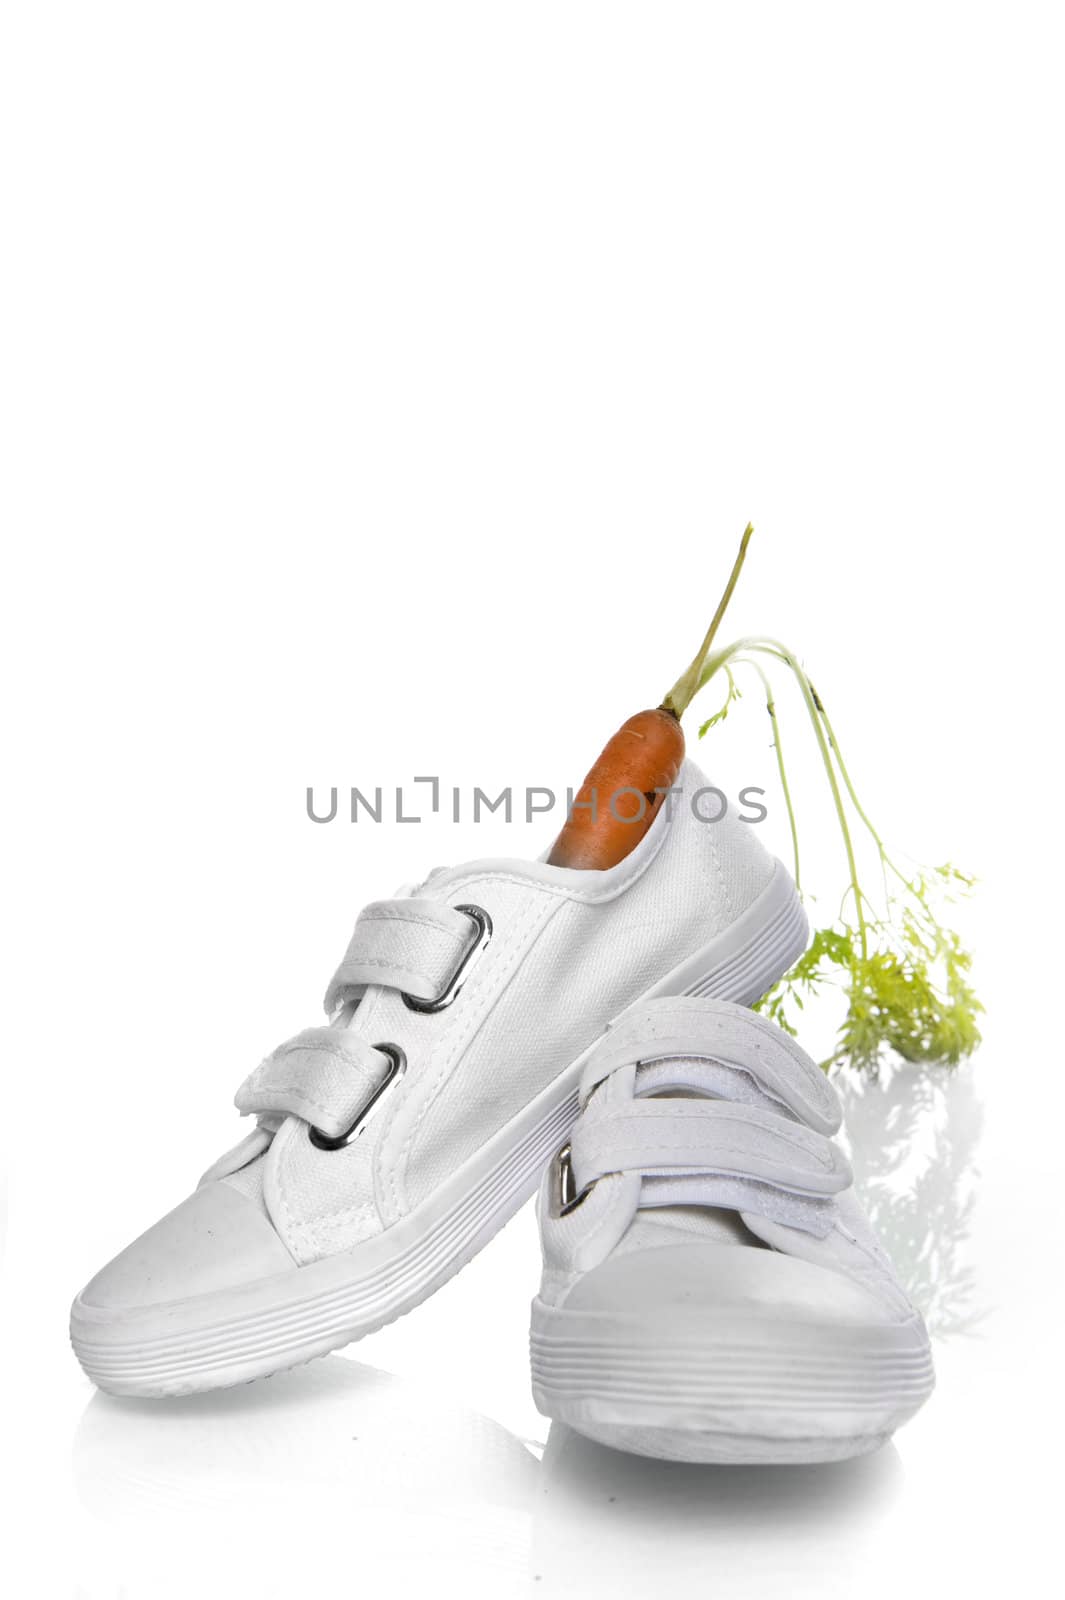 a white shoe with a carrot, a dutch tradition